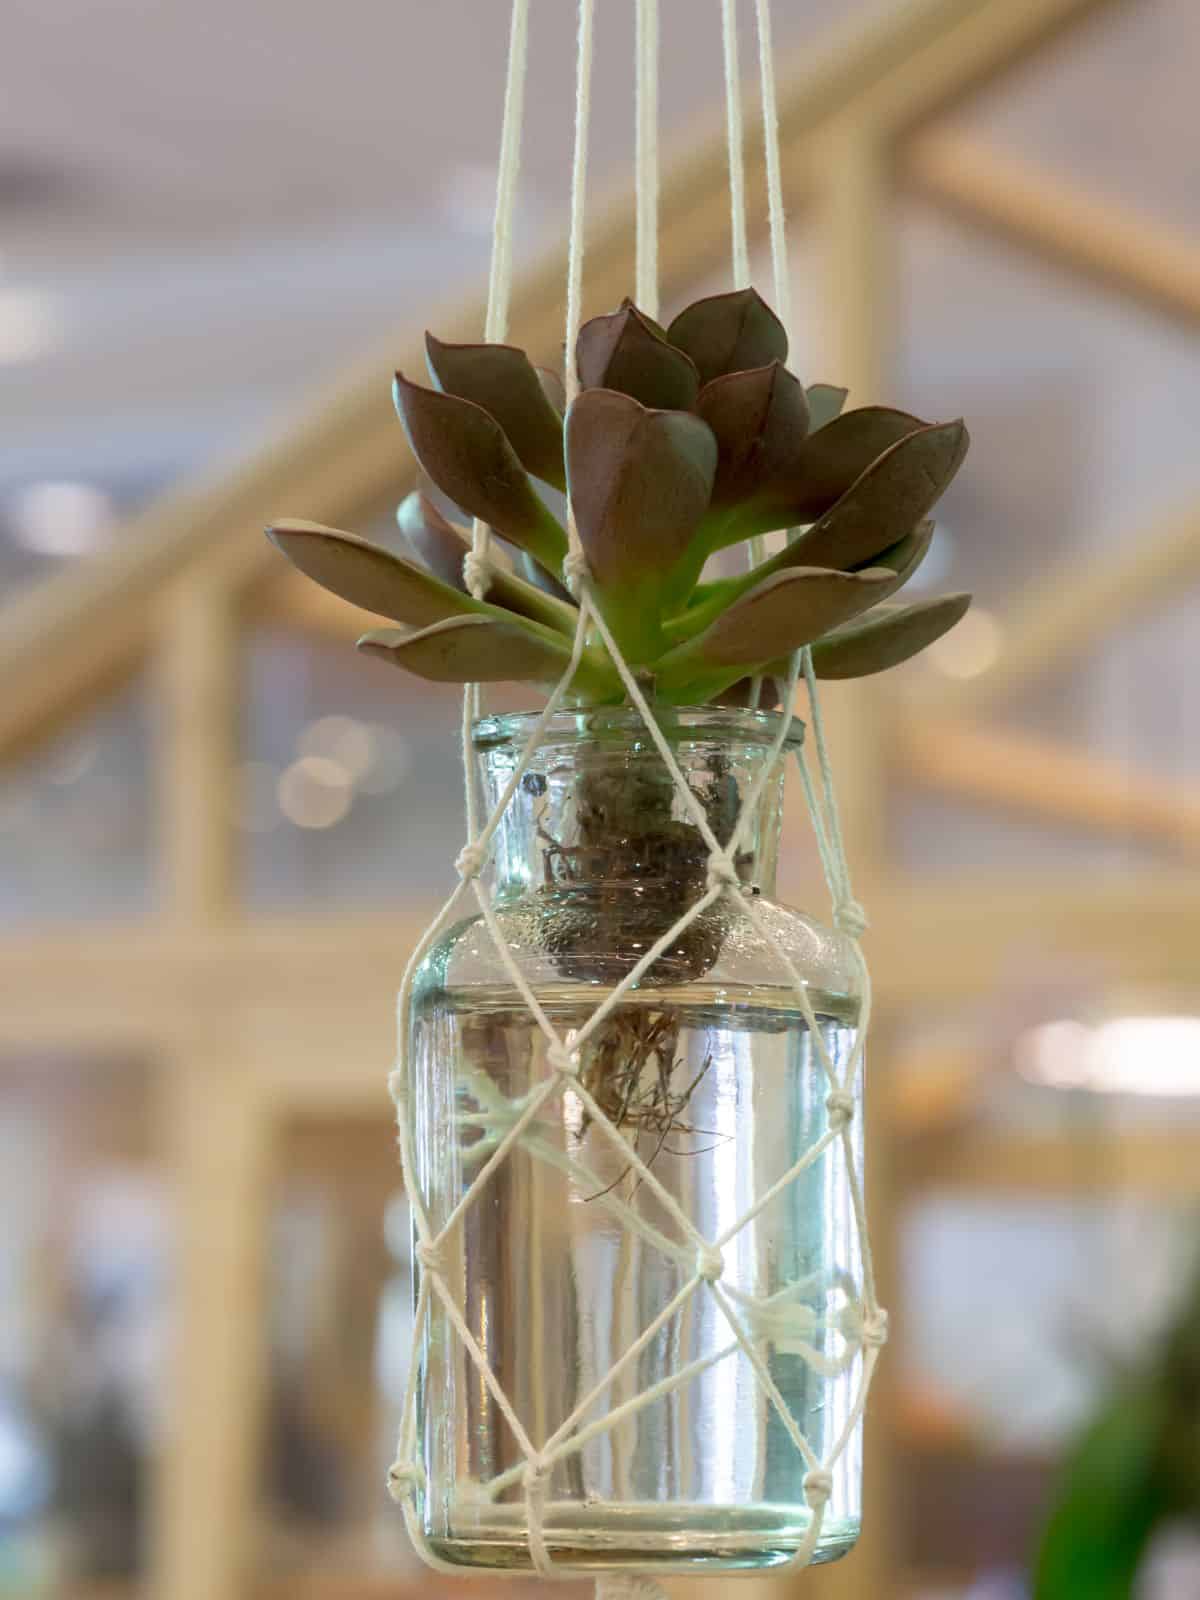 Succulent in a hanging glass jar with water.